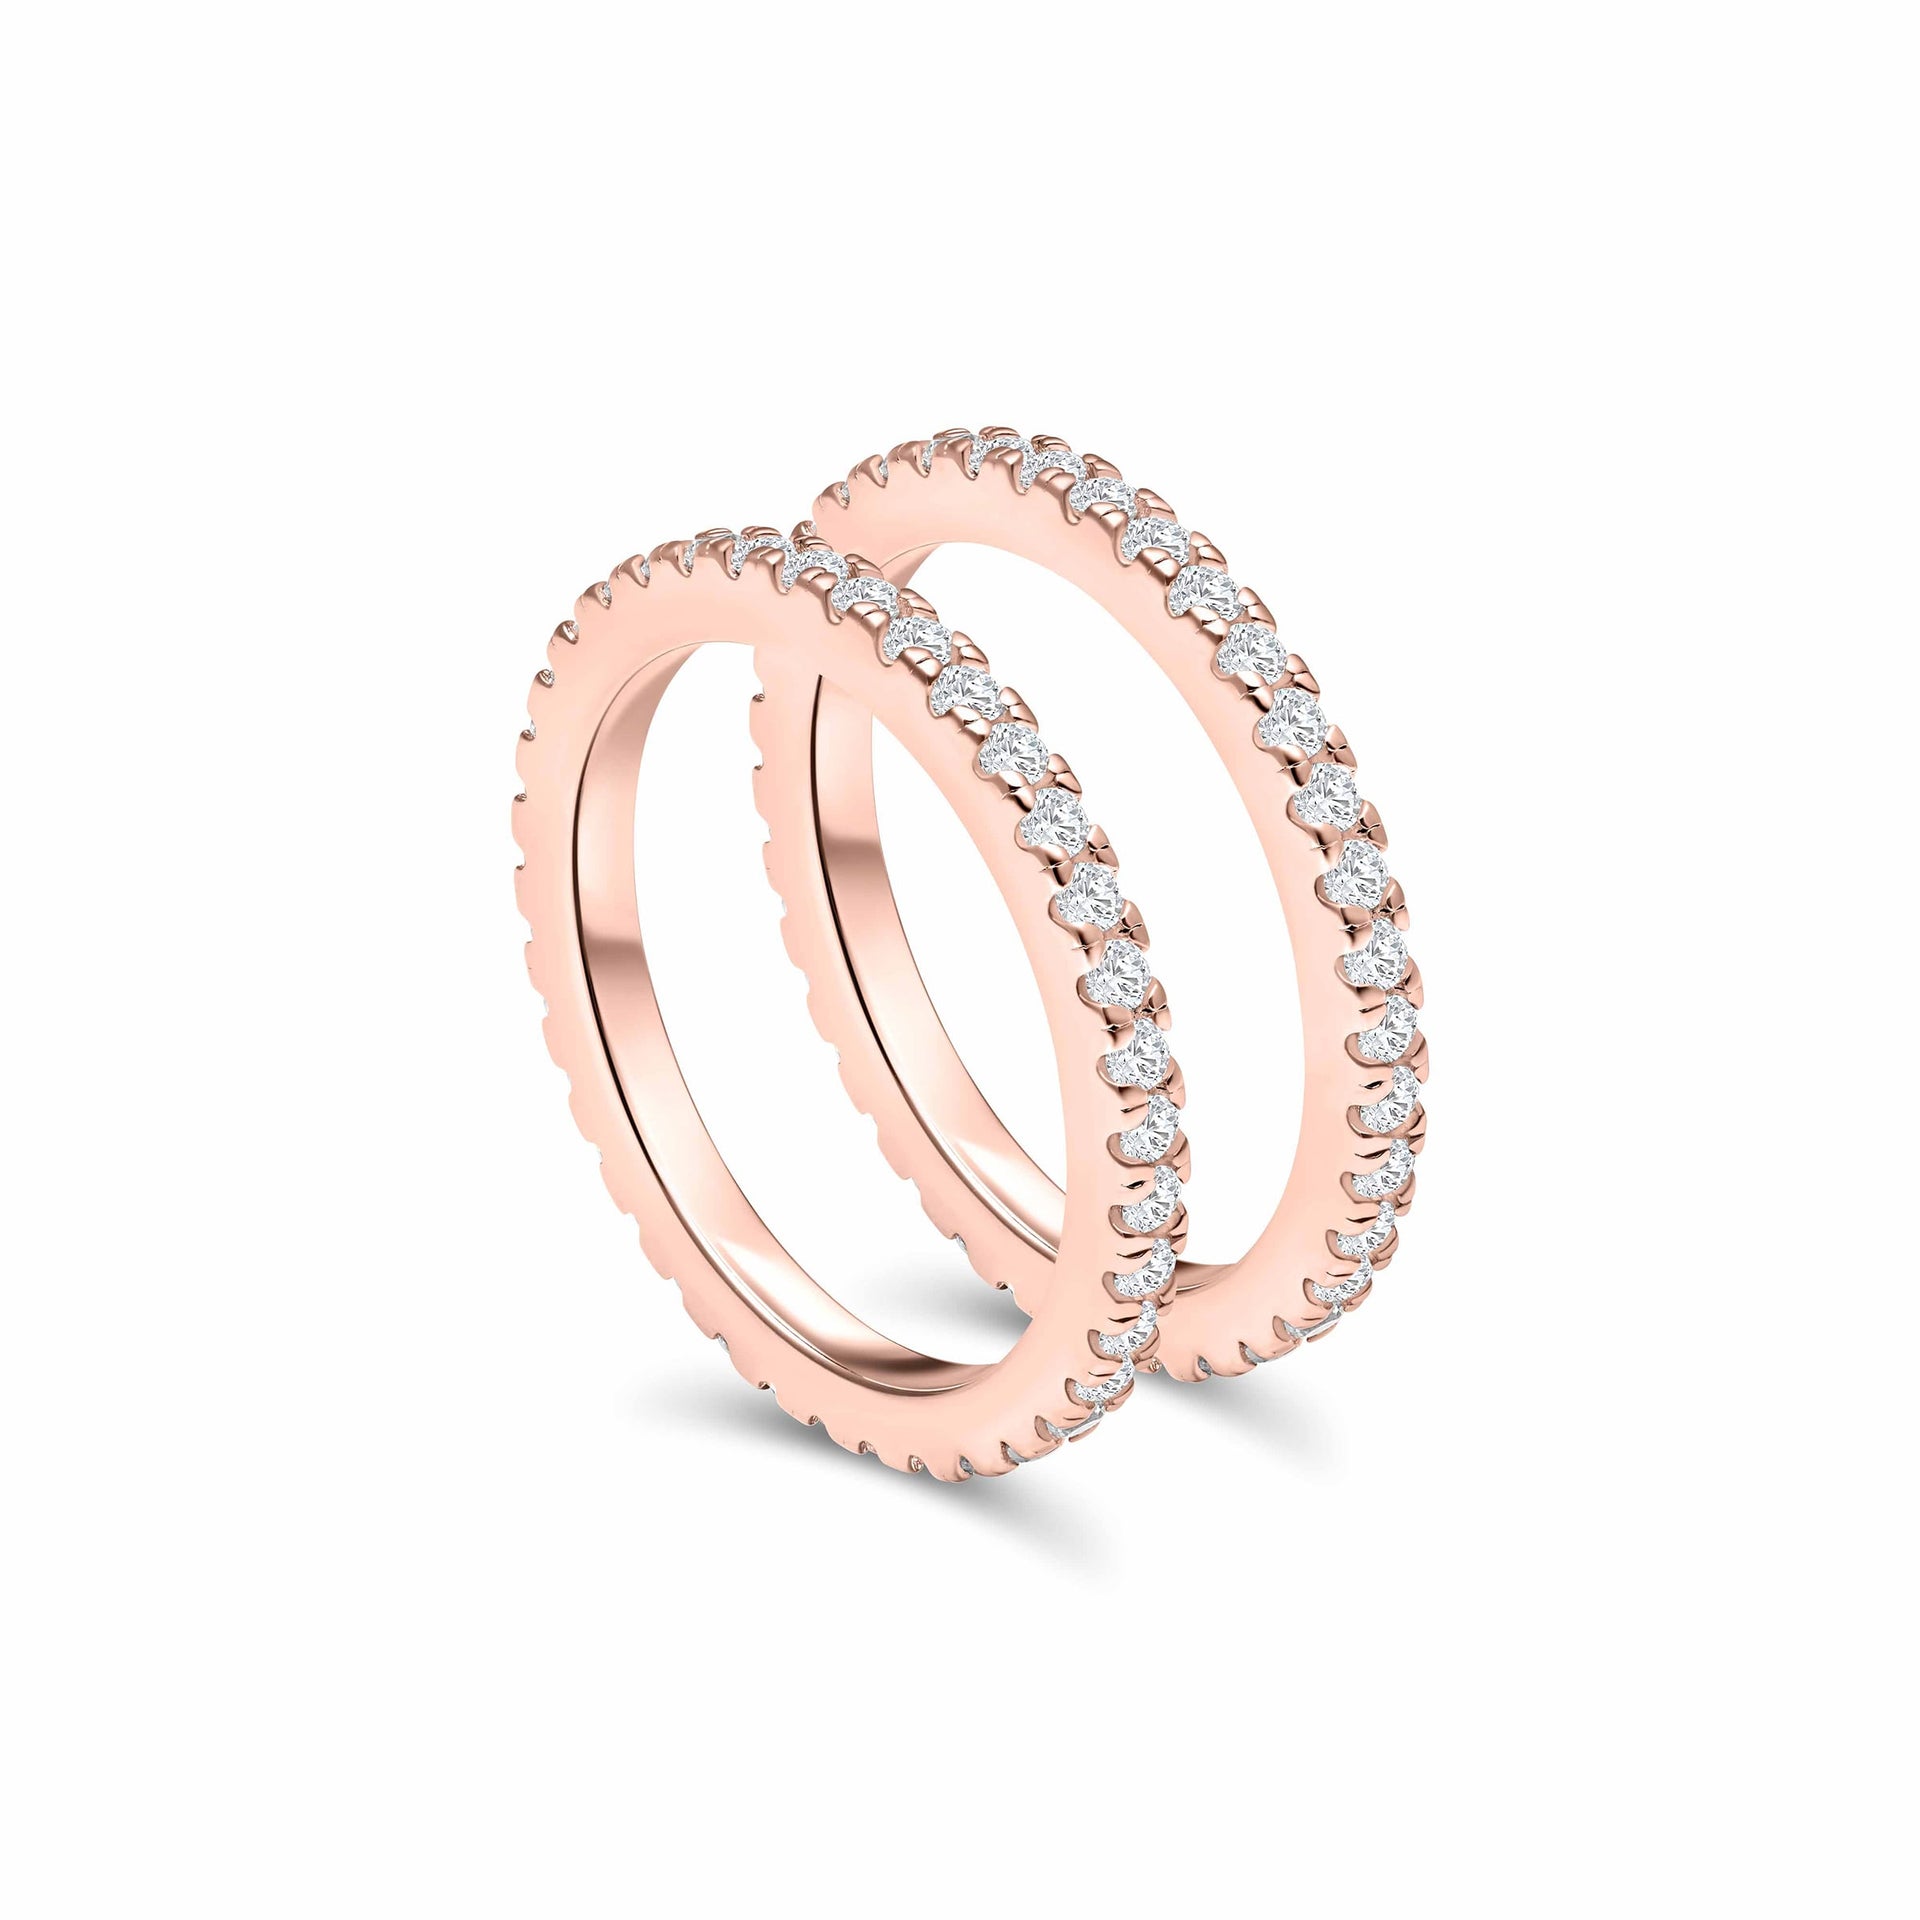 gorgeous promise wedding bands standing shown in rose gold